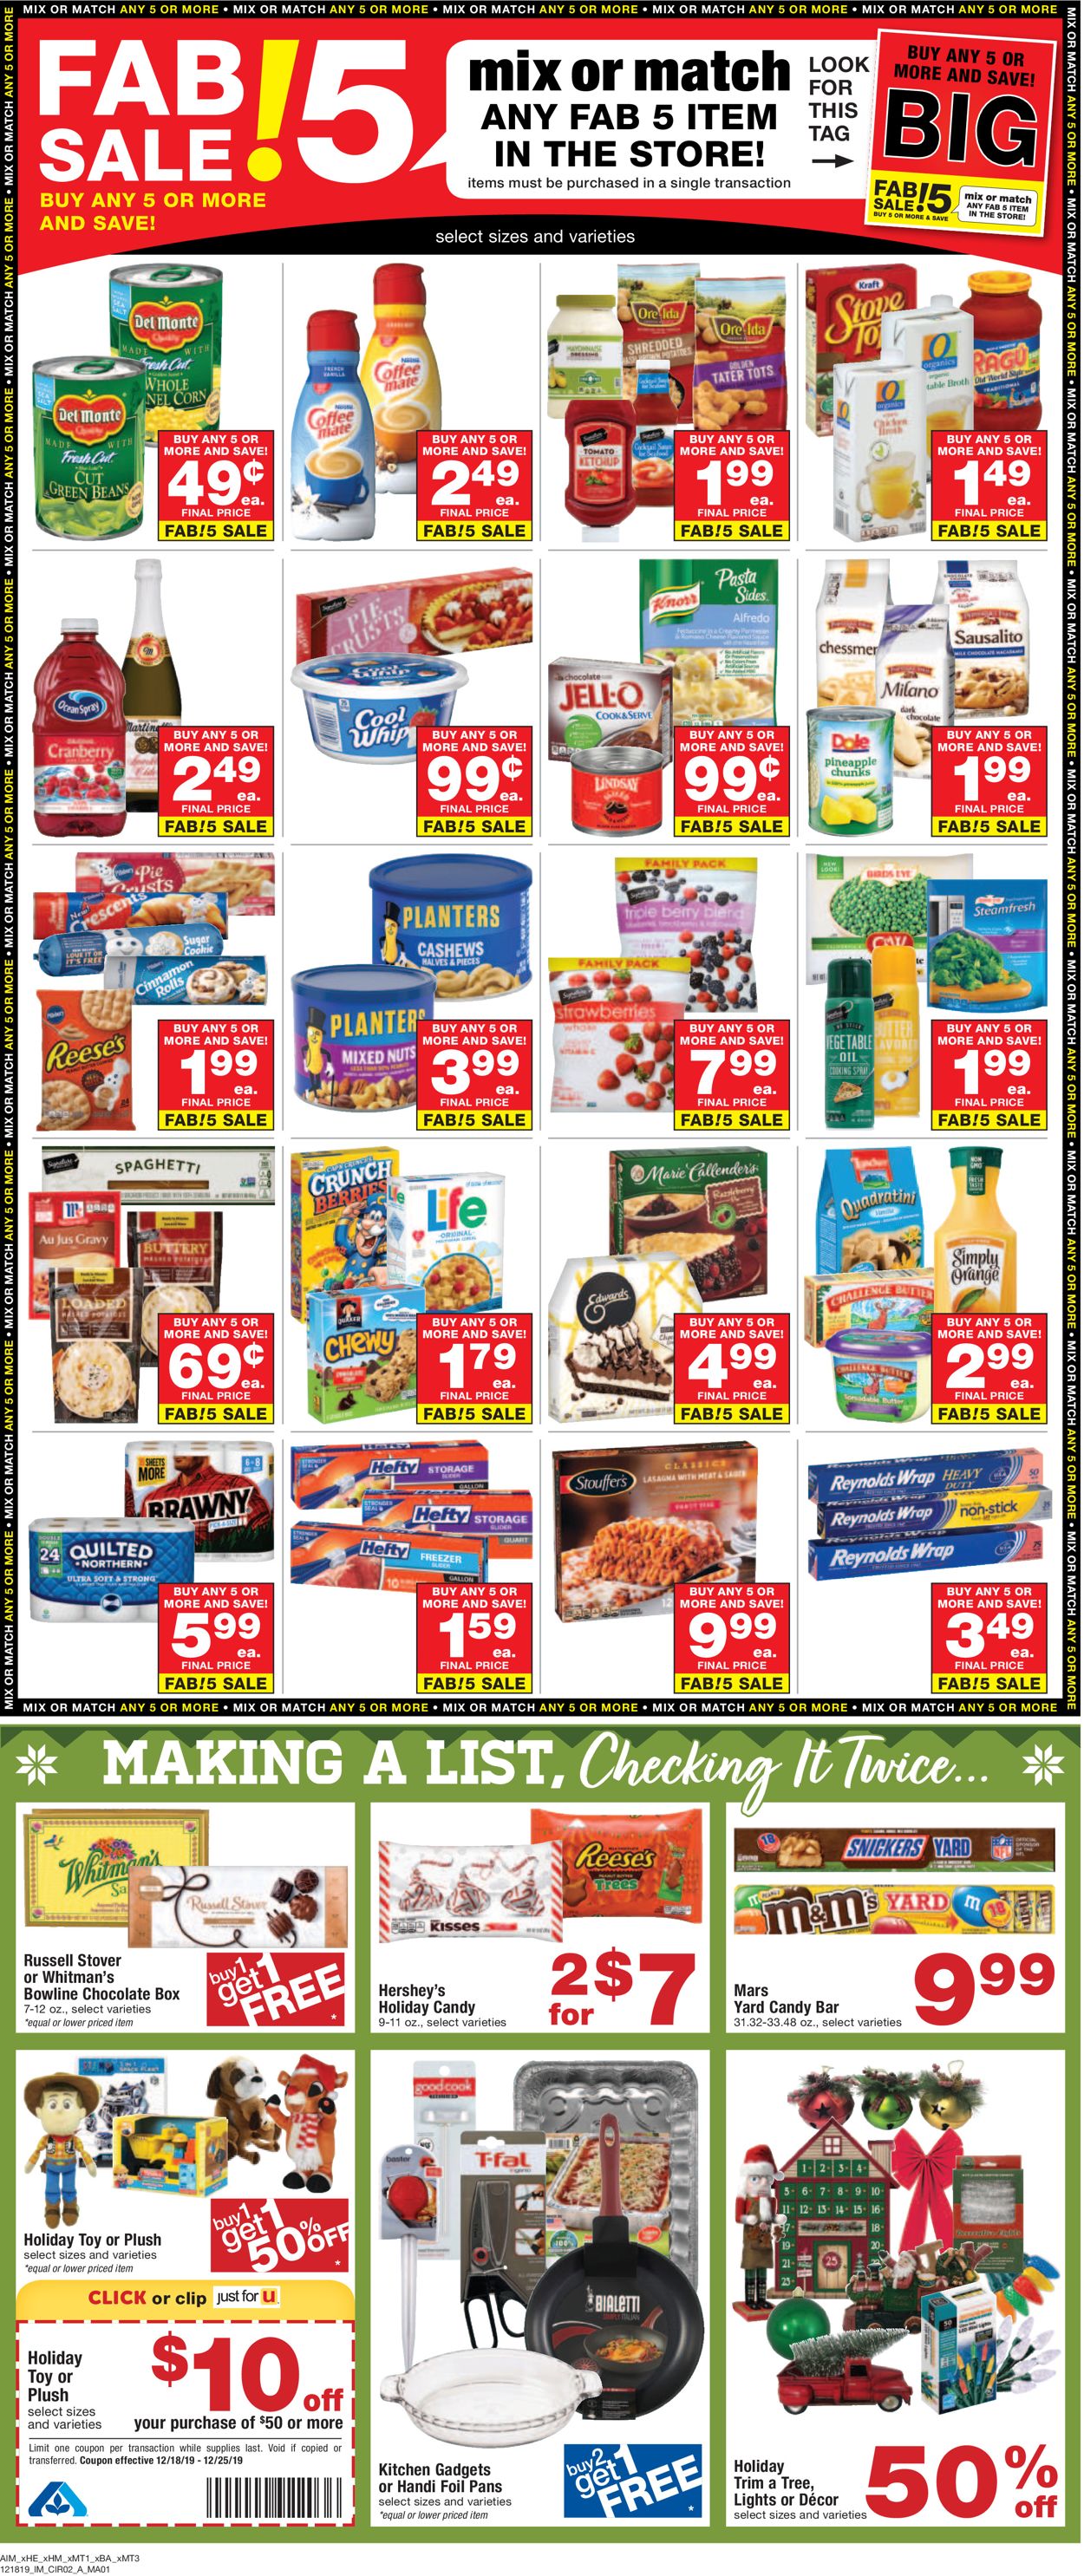 Catalogue Albertsons - Christmas Ad 2019 from 12/18/2019